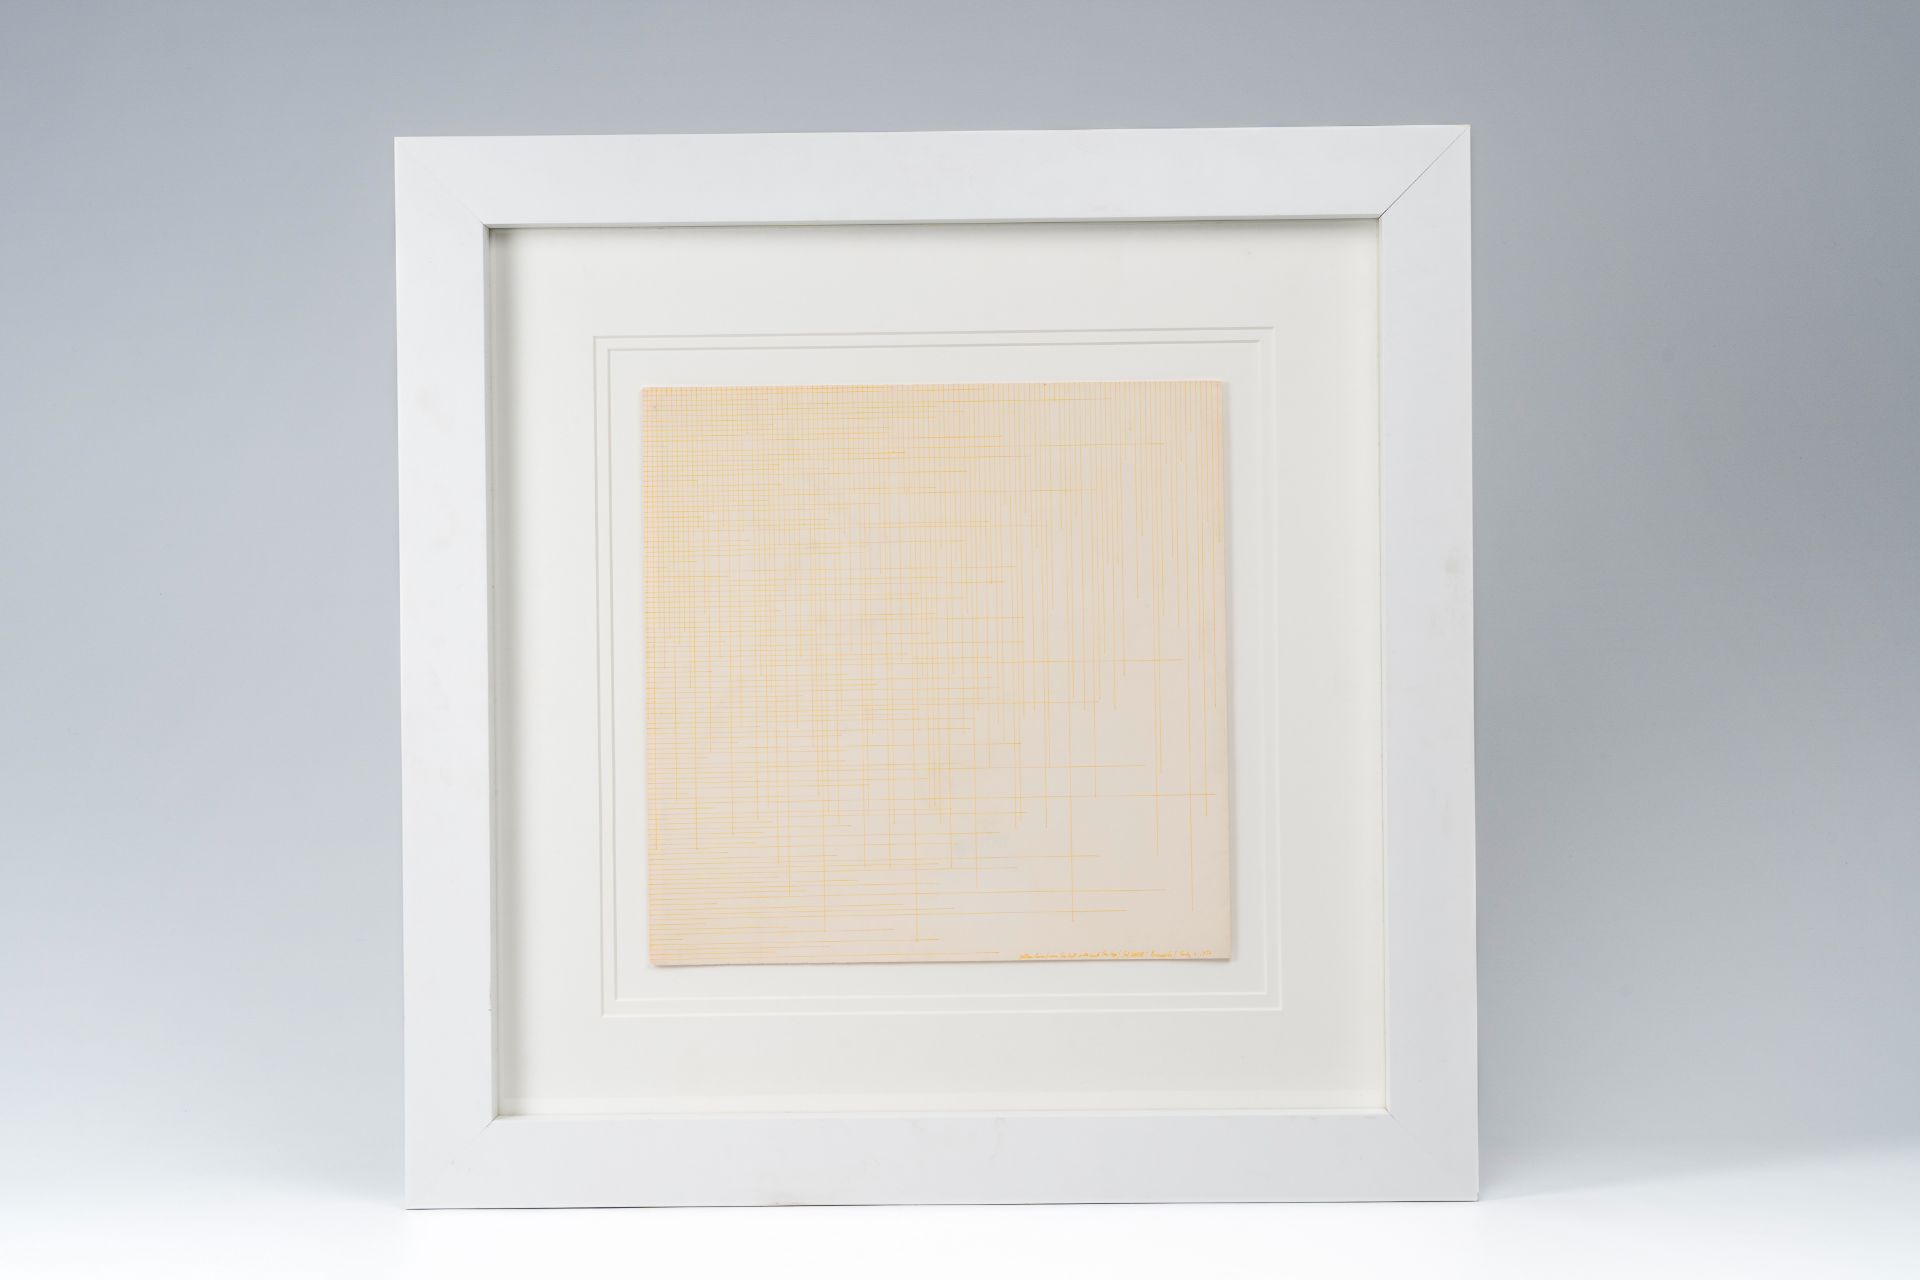 Sol Lewitt (1928-2007): 'Yellow lines from the left side and the top', ballpointpen on paper, dated - Image 2 of 4